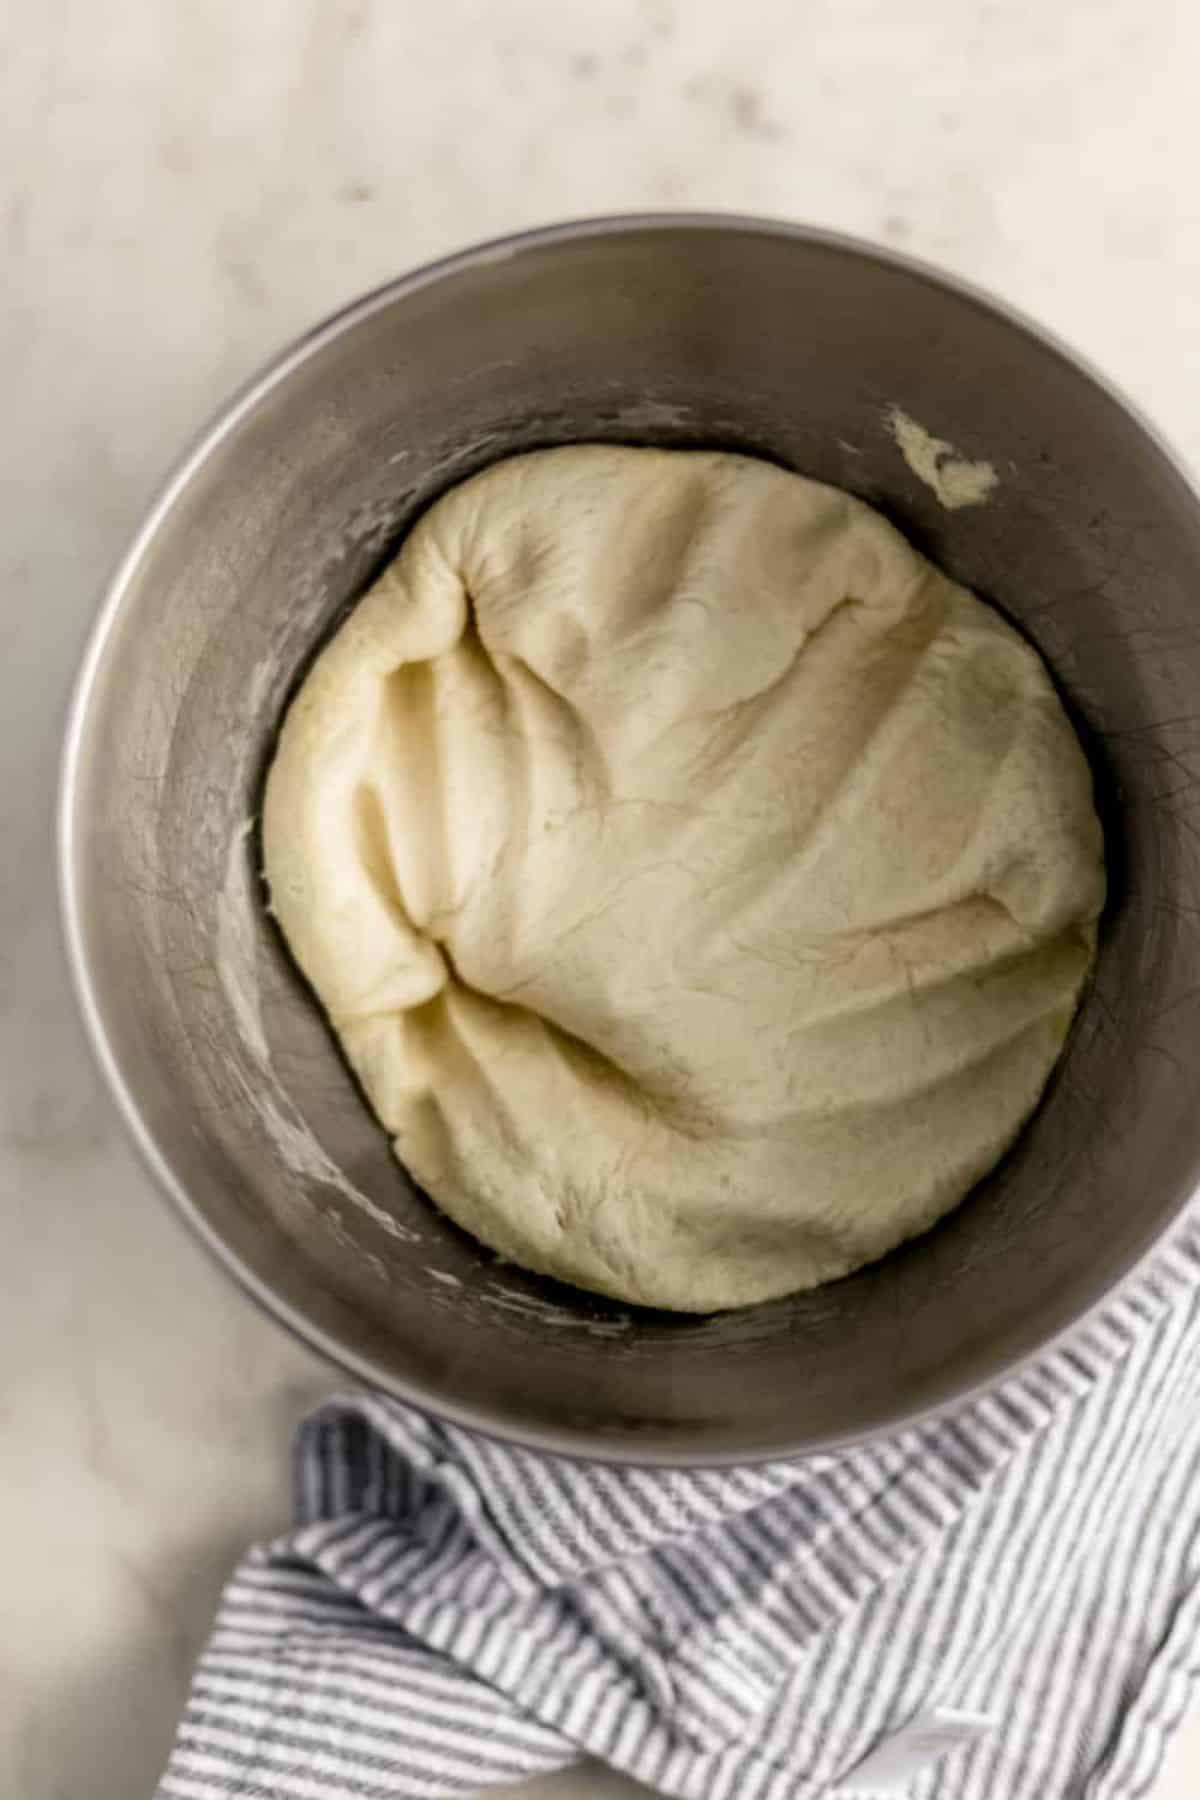 Air pressed out of pizza dough in stand mixer bowl beside a cloth napkin.